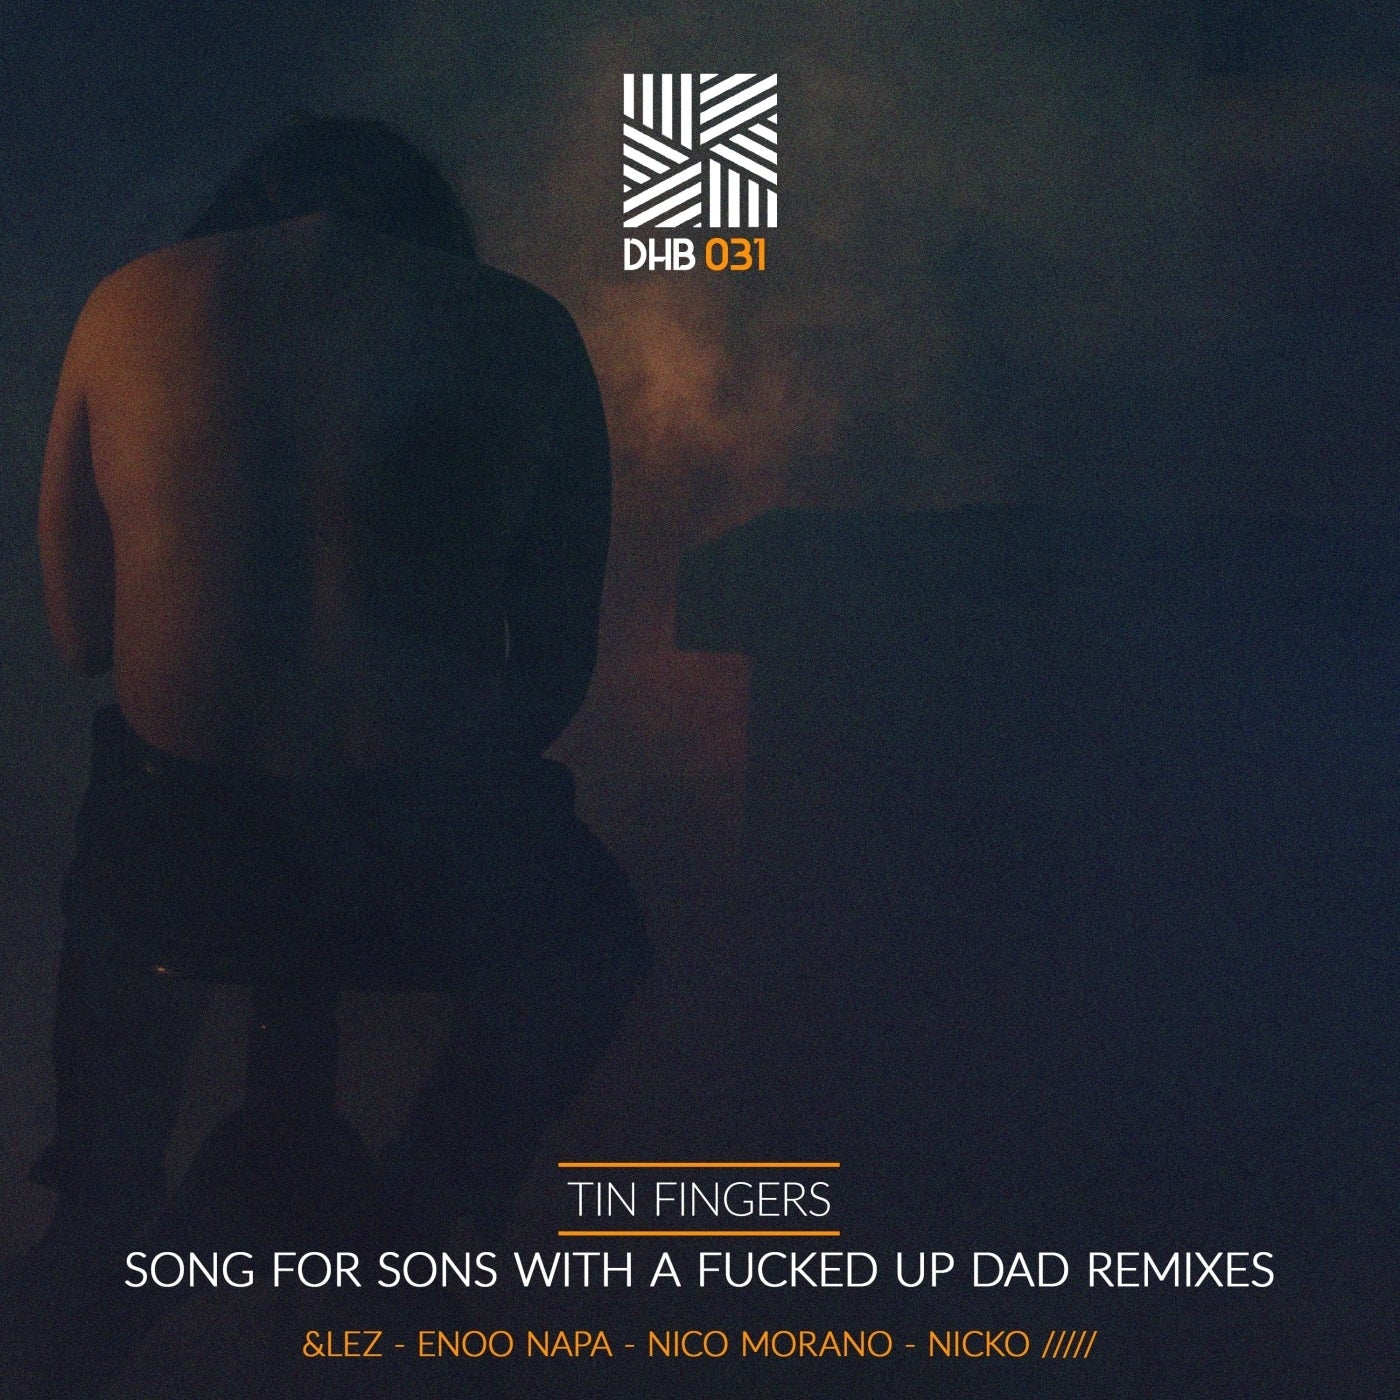 Tin Fingers – Song for Sons With a Fucked Up Dad Remixes [DHB031]